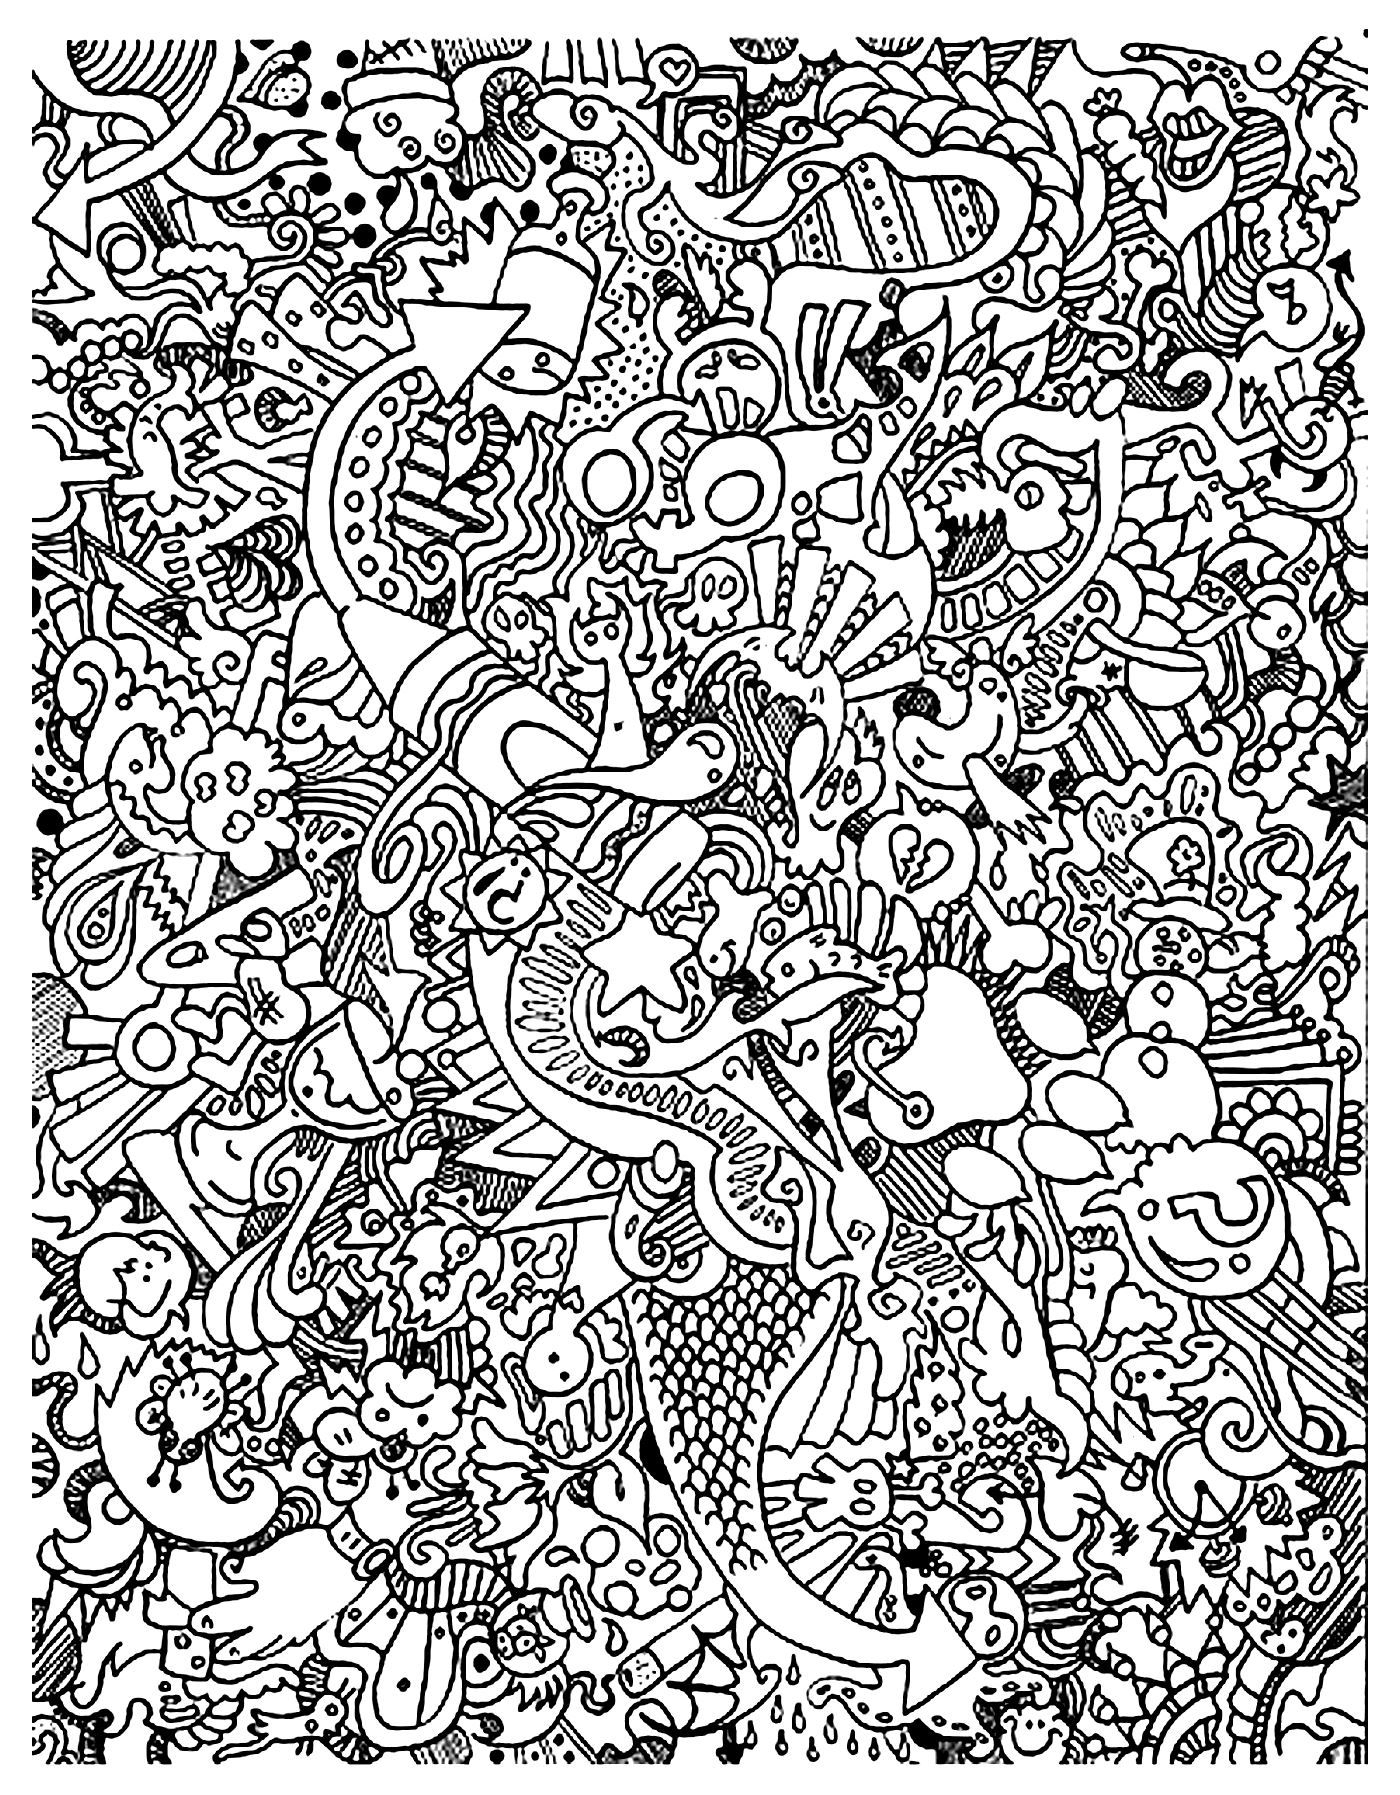 Free Coloring Page Coloring-Doodle-Art-Doodling-18. Very Complex - Free Printable Doodle Art Coloring Pages